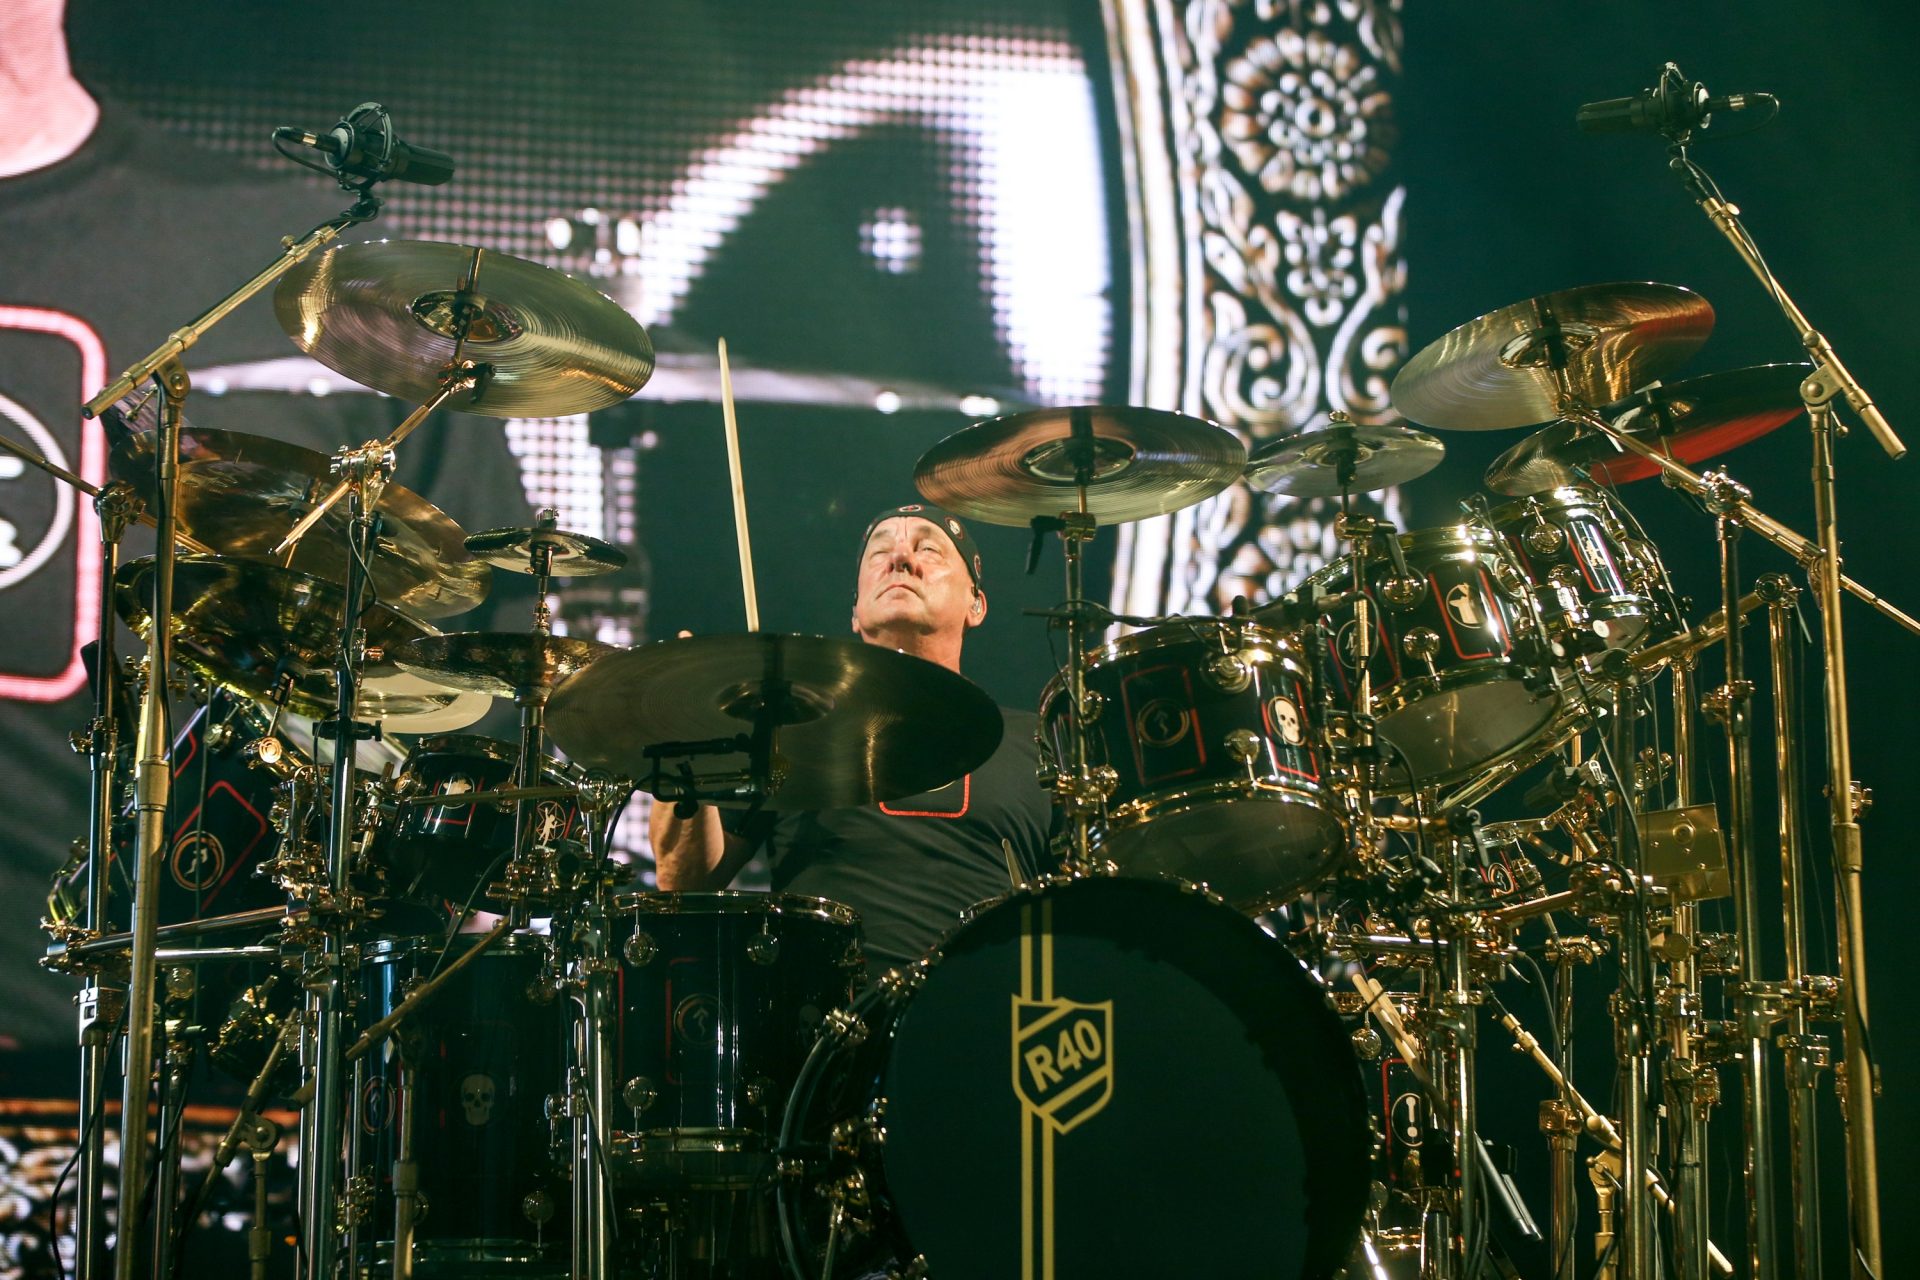 Neil Peart of Rush performs during the final show of the R40 Tour at The Forum on Saturday, August 1, 2015, in Los Angeles.